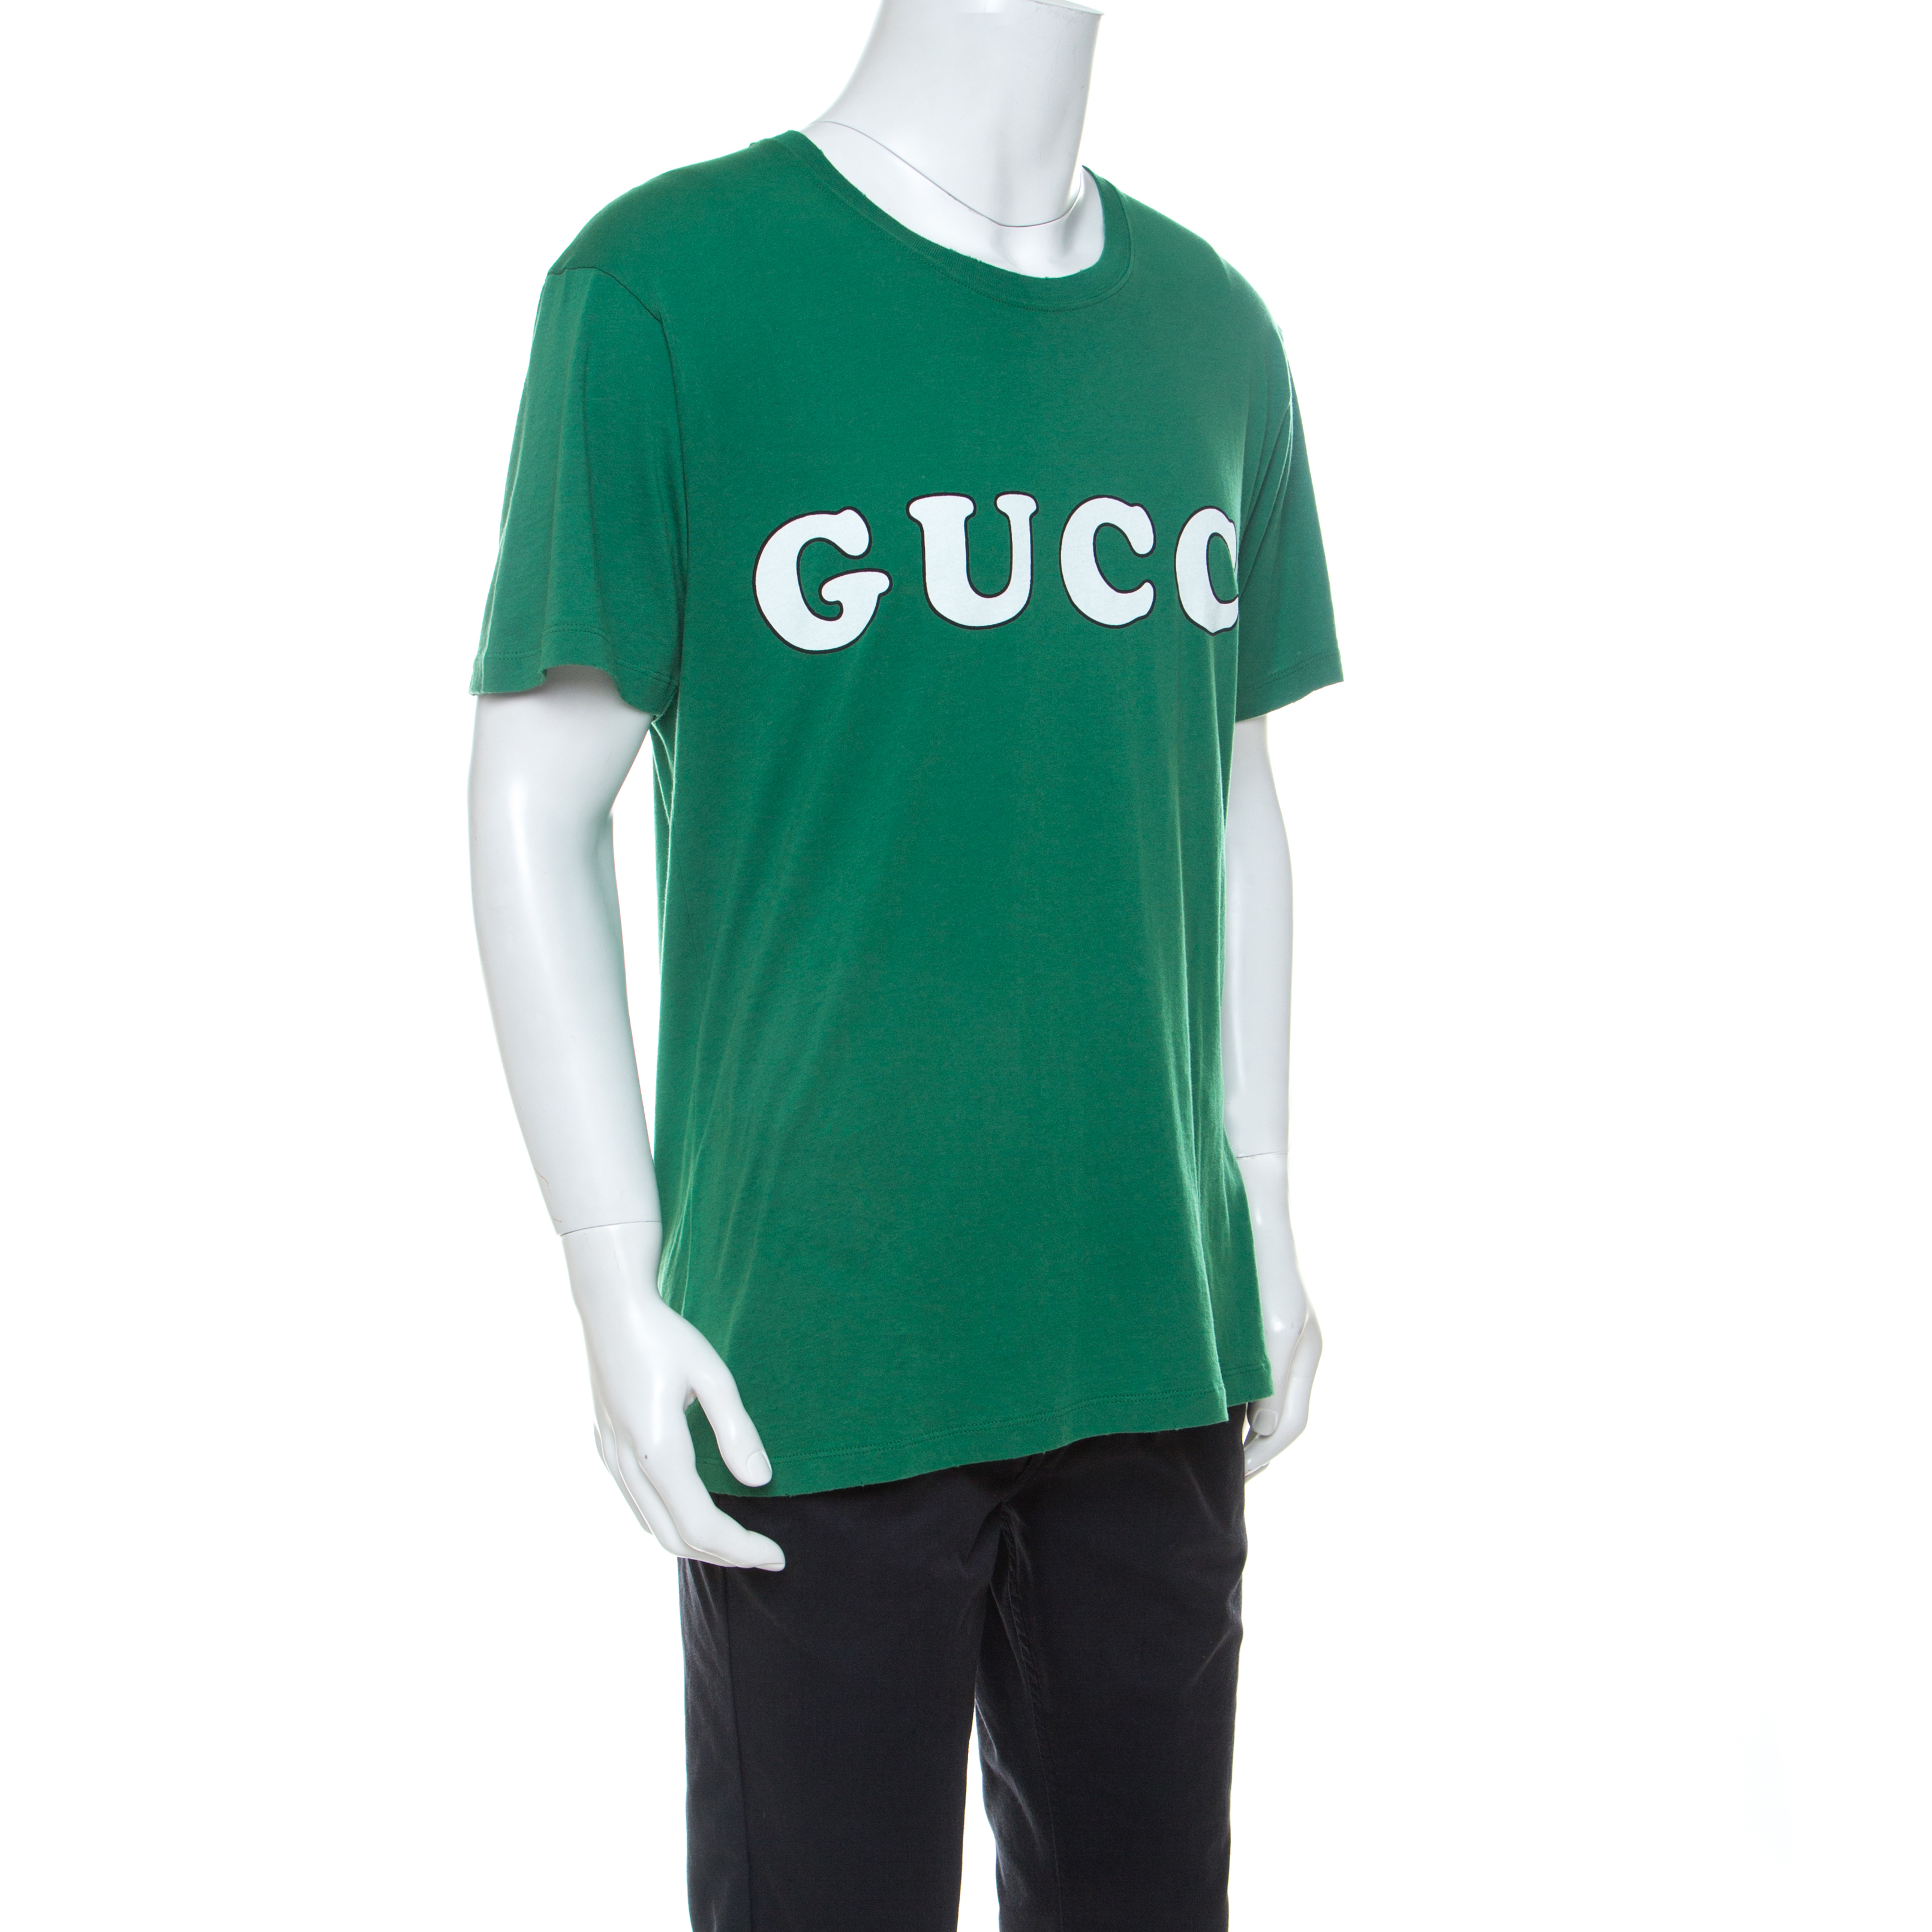 baby gucci top